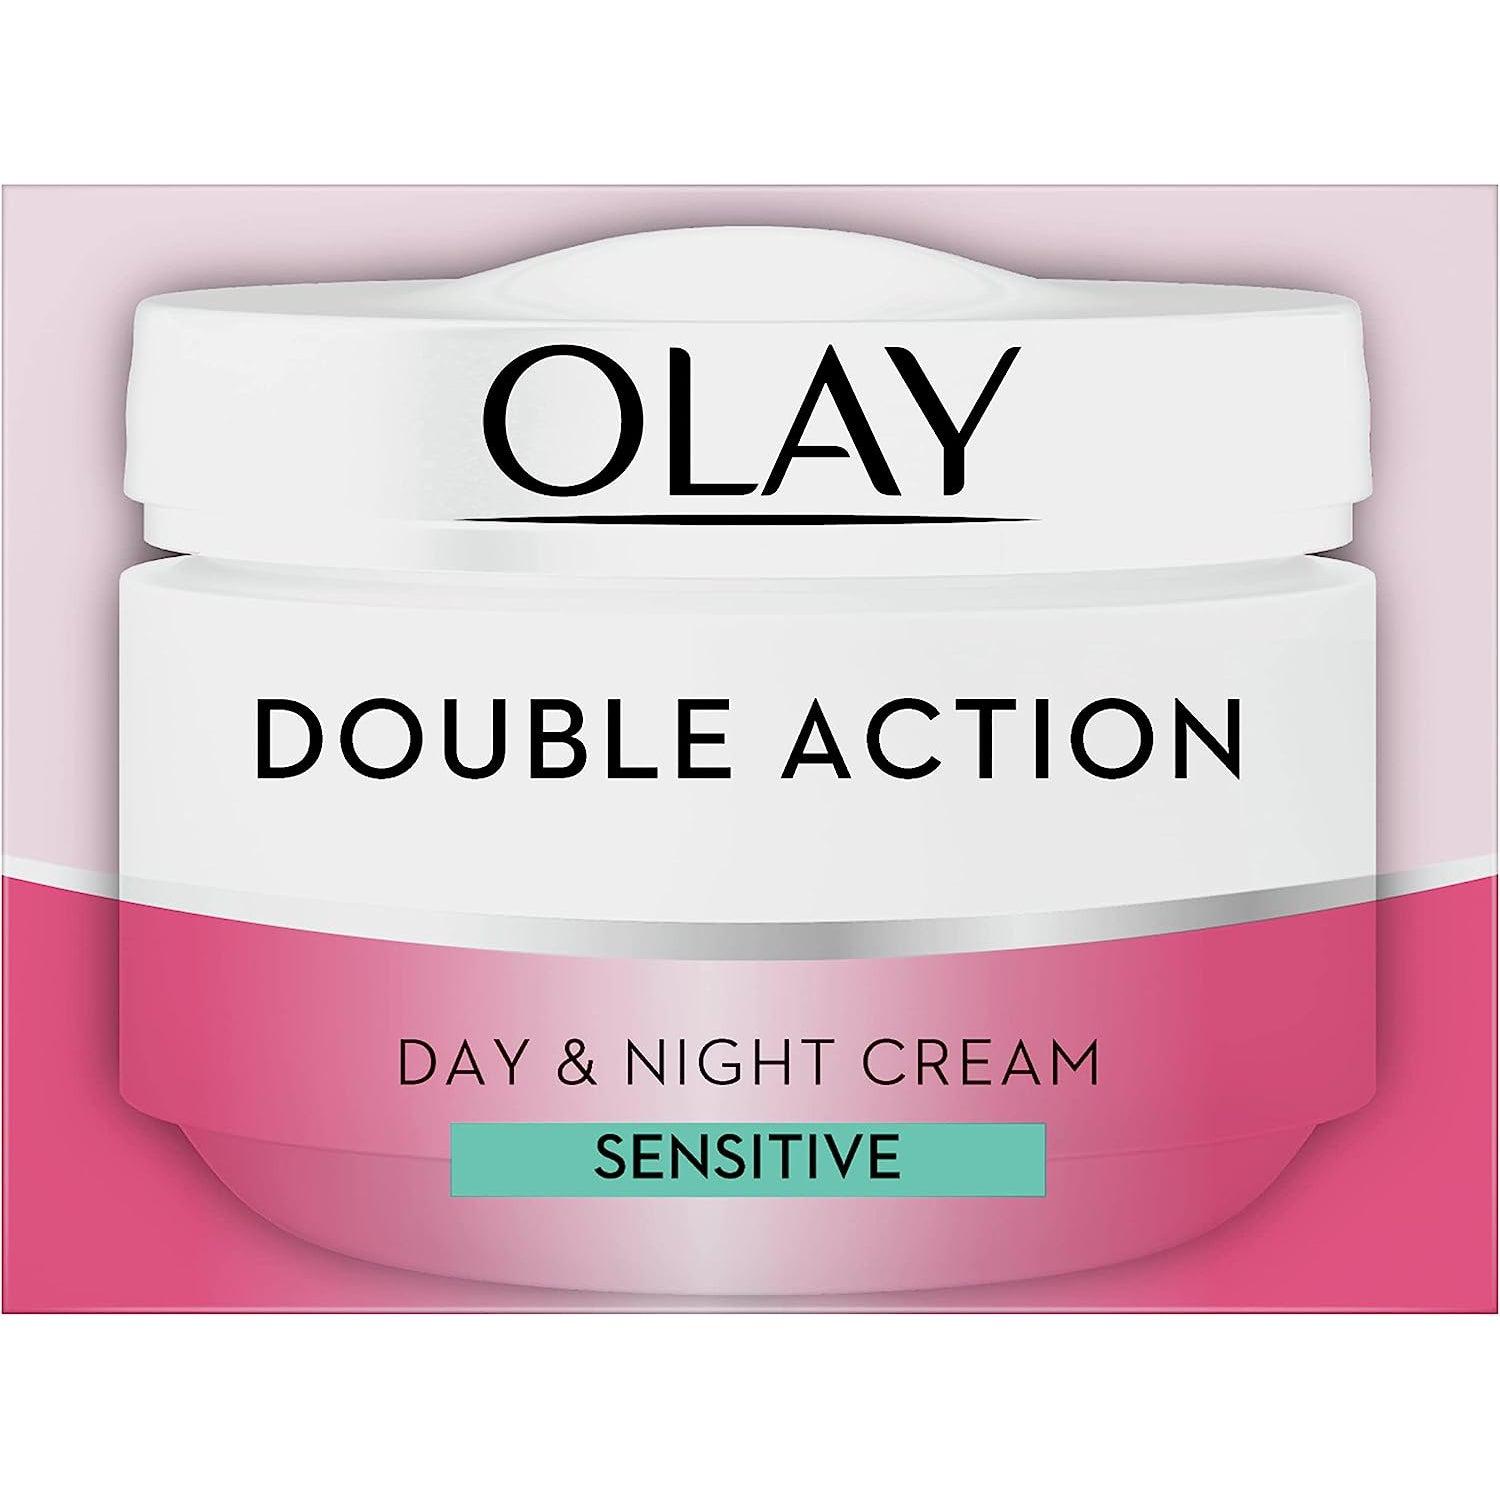 Olay Double Action Day & Night Sensitive Cream, 50ml - Healthxpress.ie